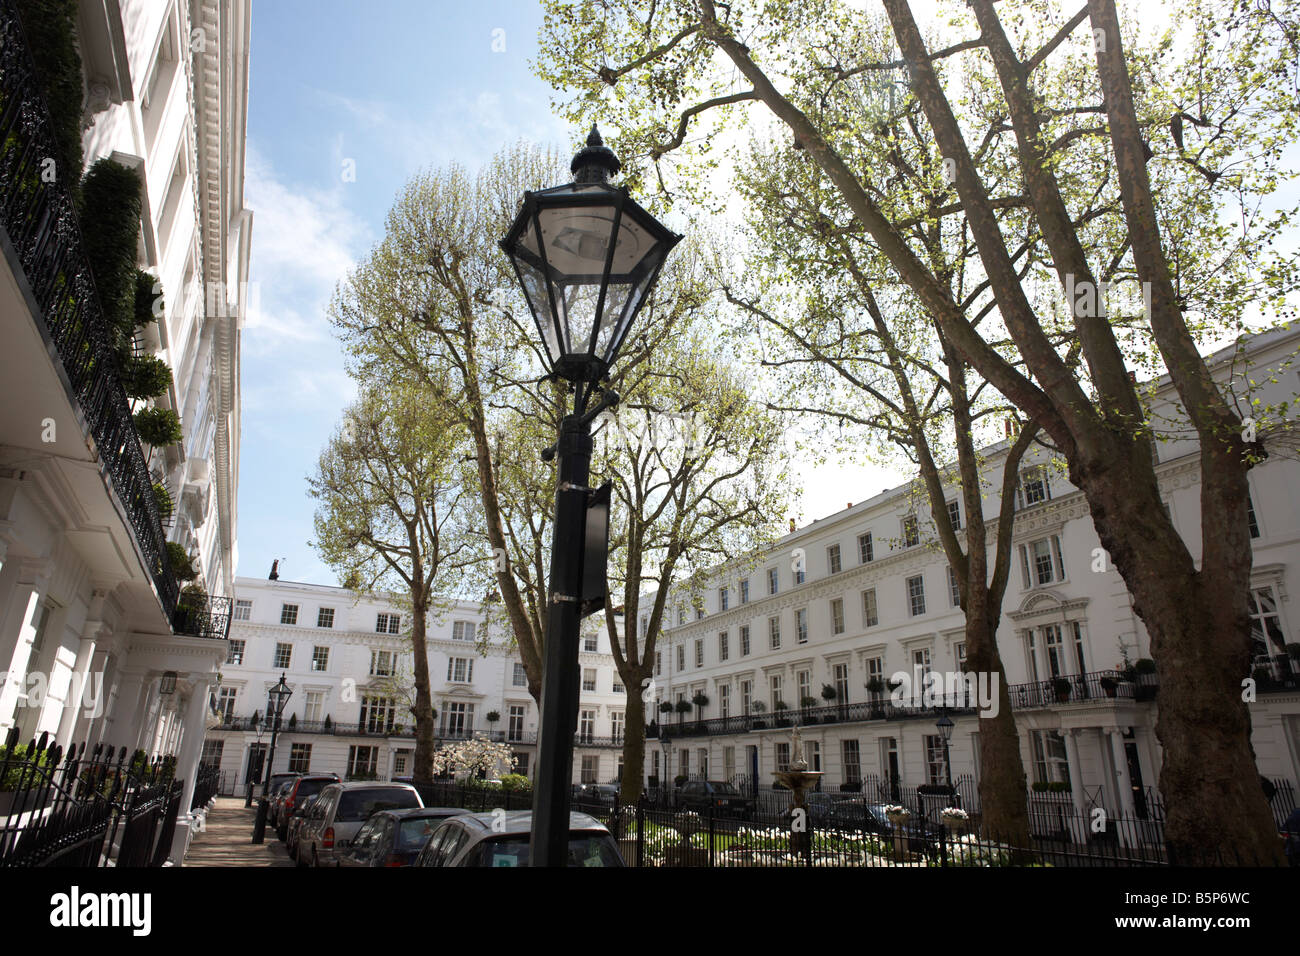 Immaculate and identical white-painted properties and ornamental lamp post in exclusive Wellington Square, London SW3 Stock Photo